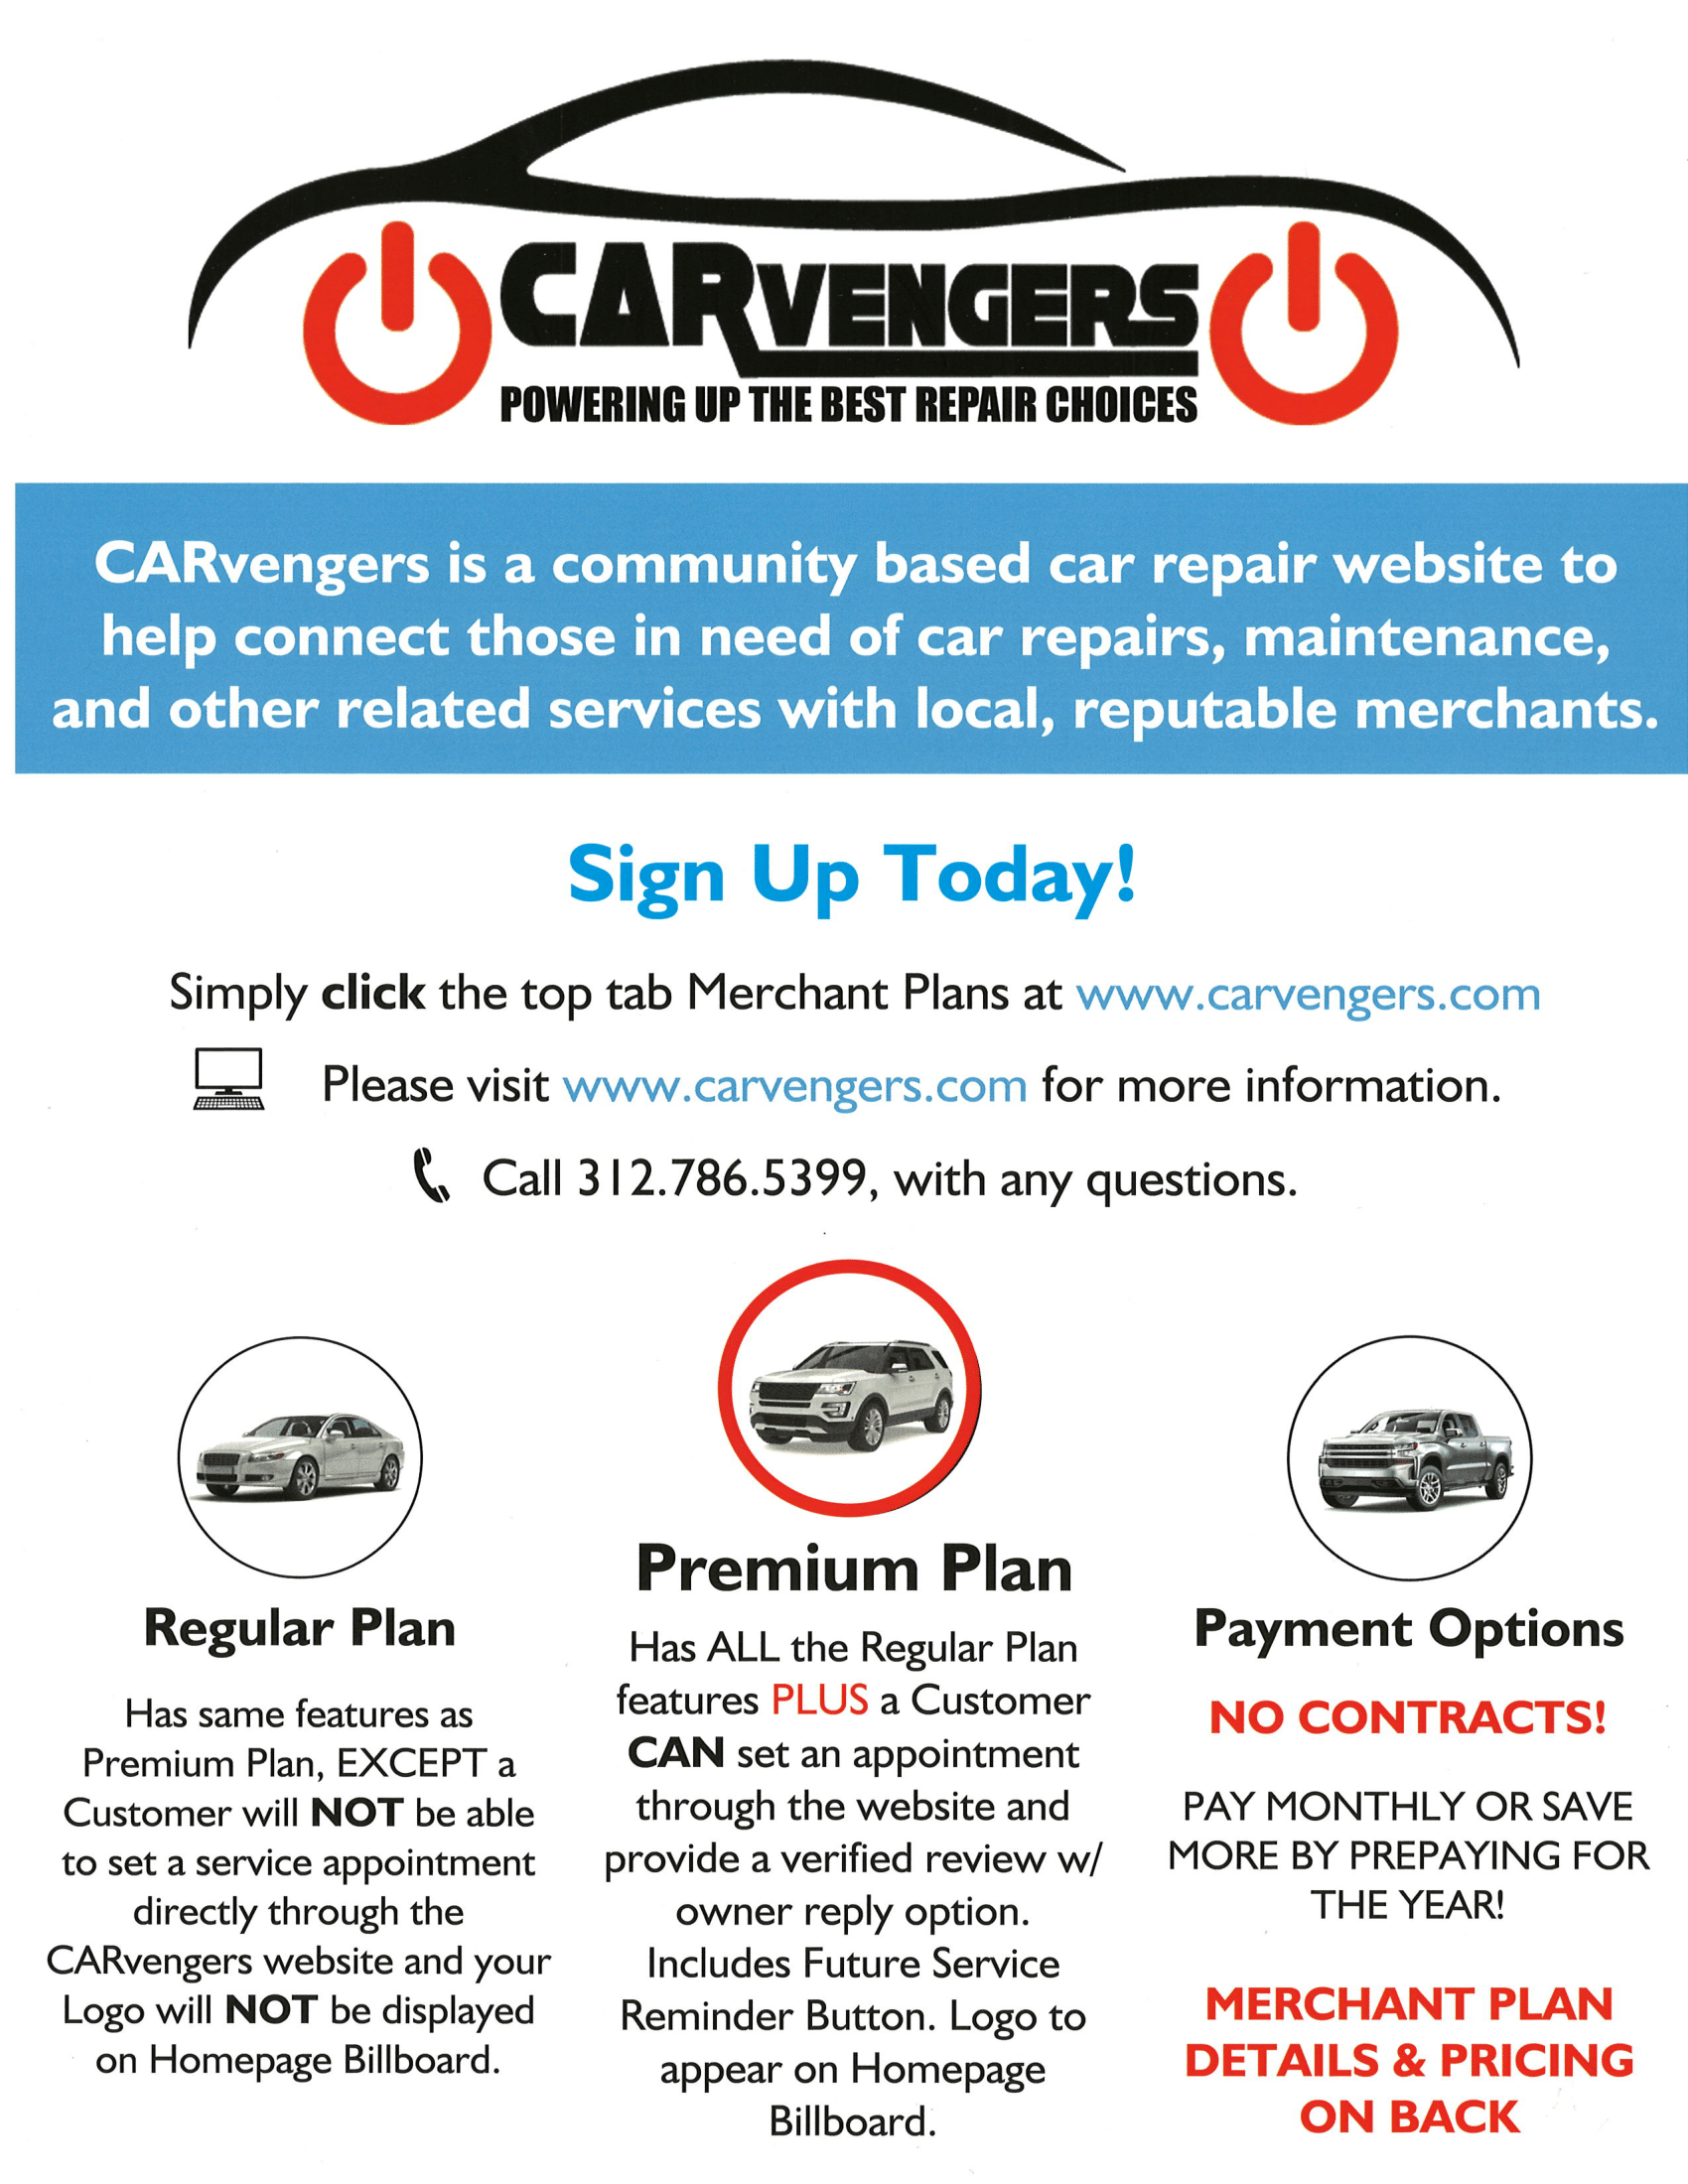 The newly launched website, CARvengers.com helps consumers locate the best auto repair shop near them while creating a way for local businesses to access a technology platform to grow their clientele.